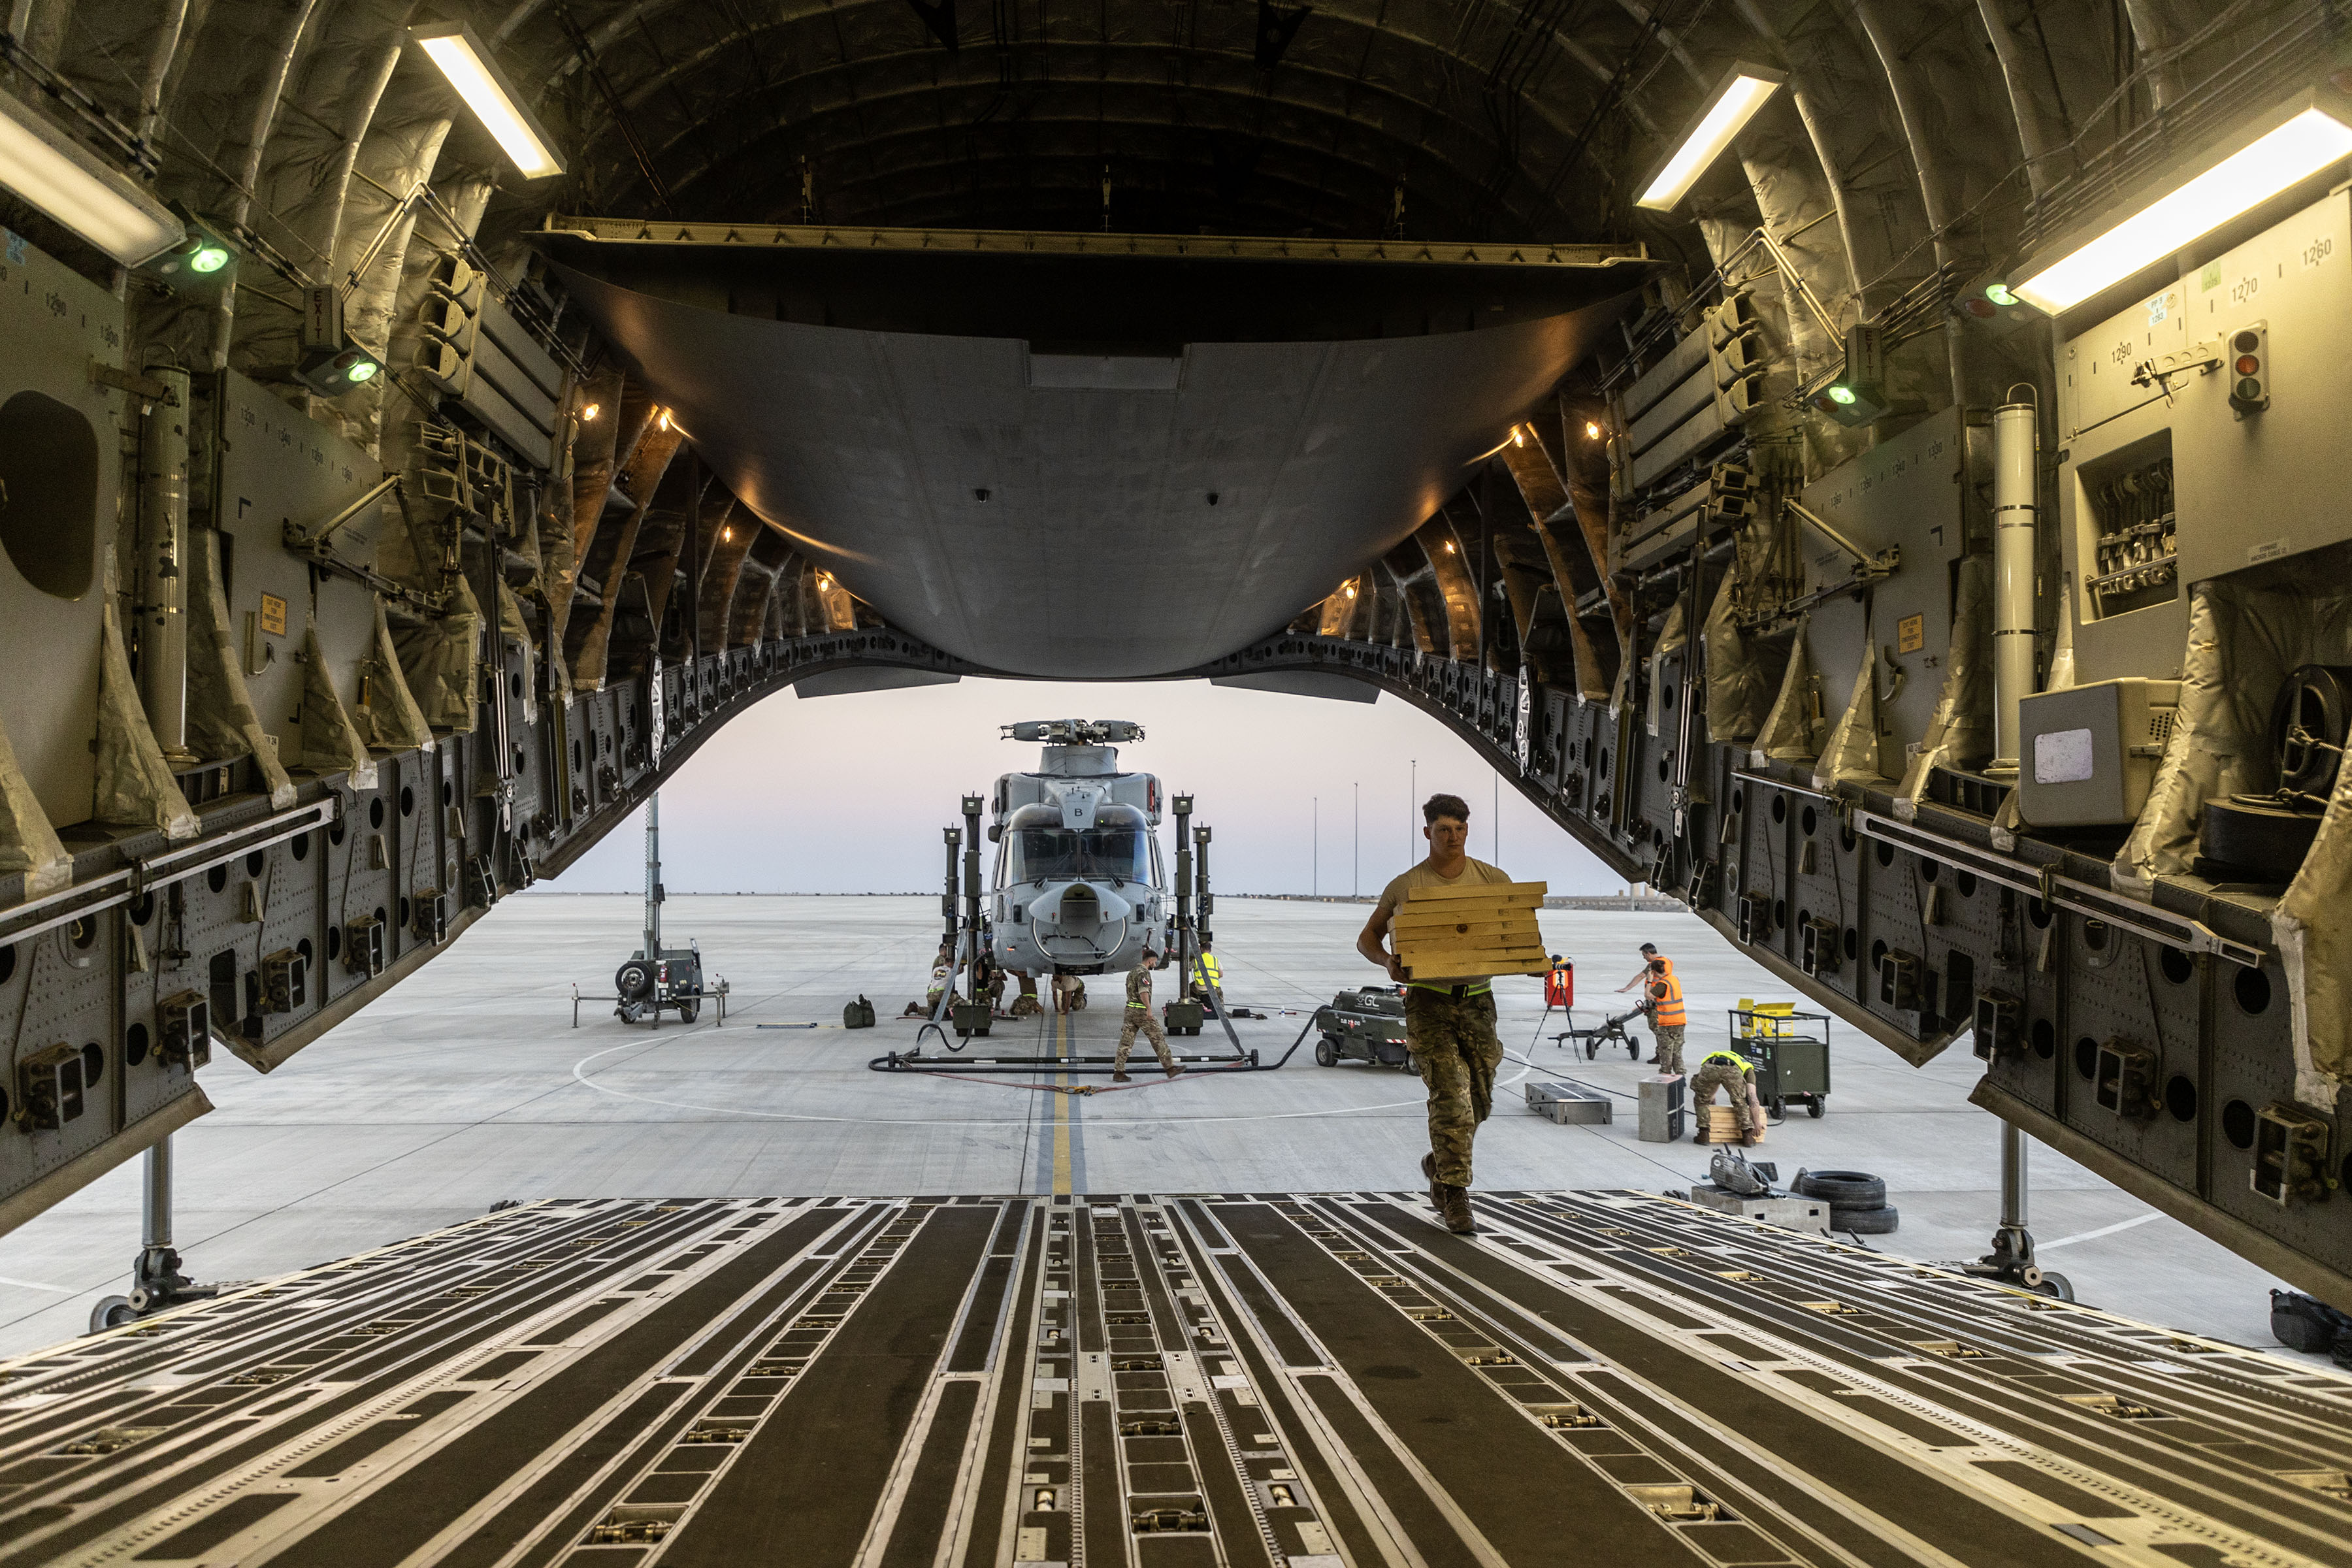 Photo - A view of the Merlin behind the RAF Globemaster aircraft, looking from inside the cargo bay, through the ramp and door